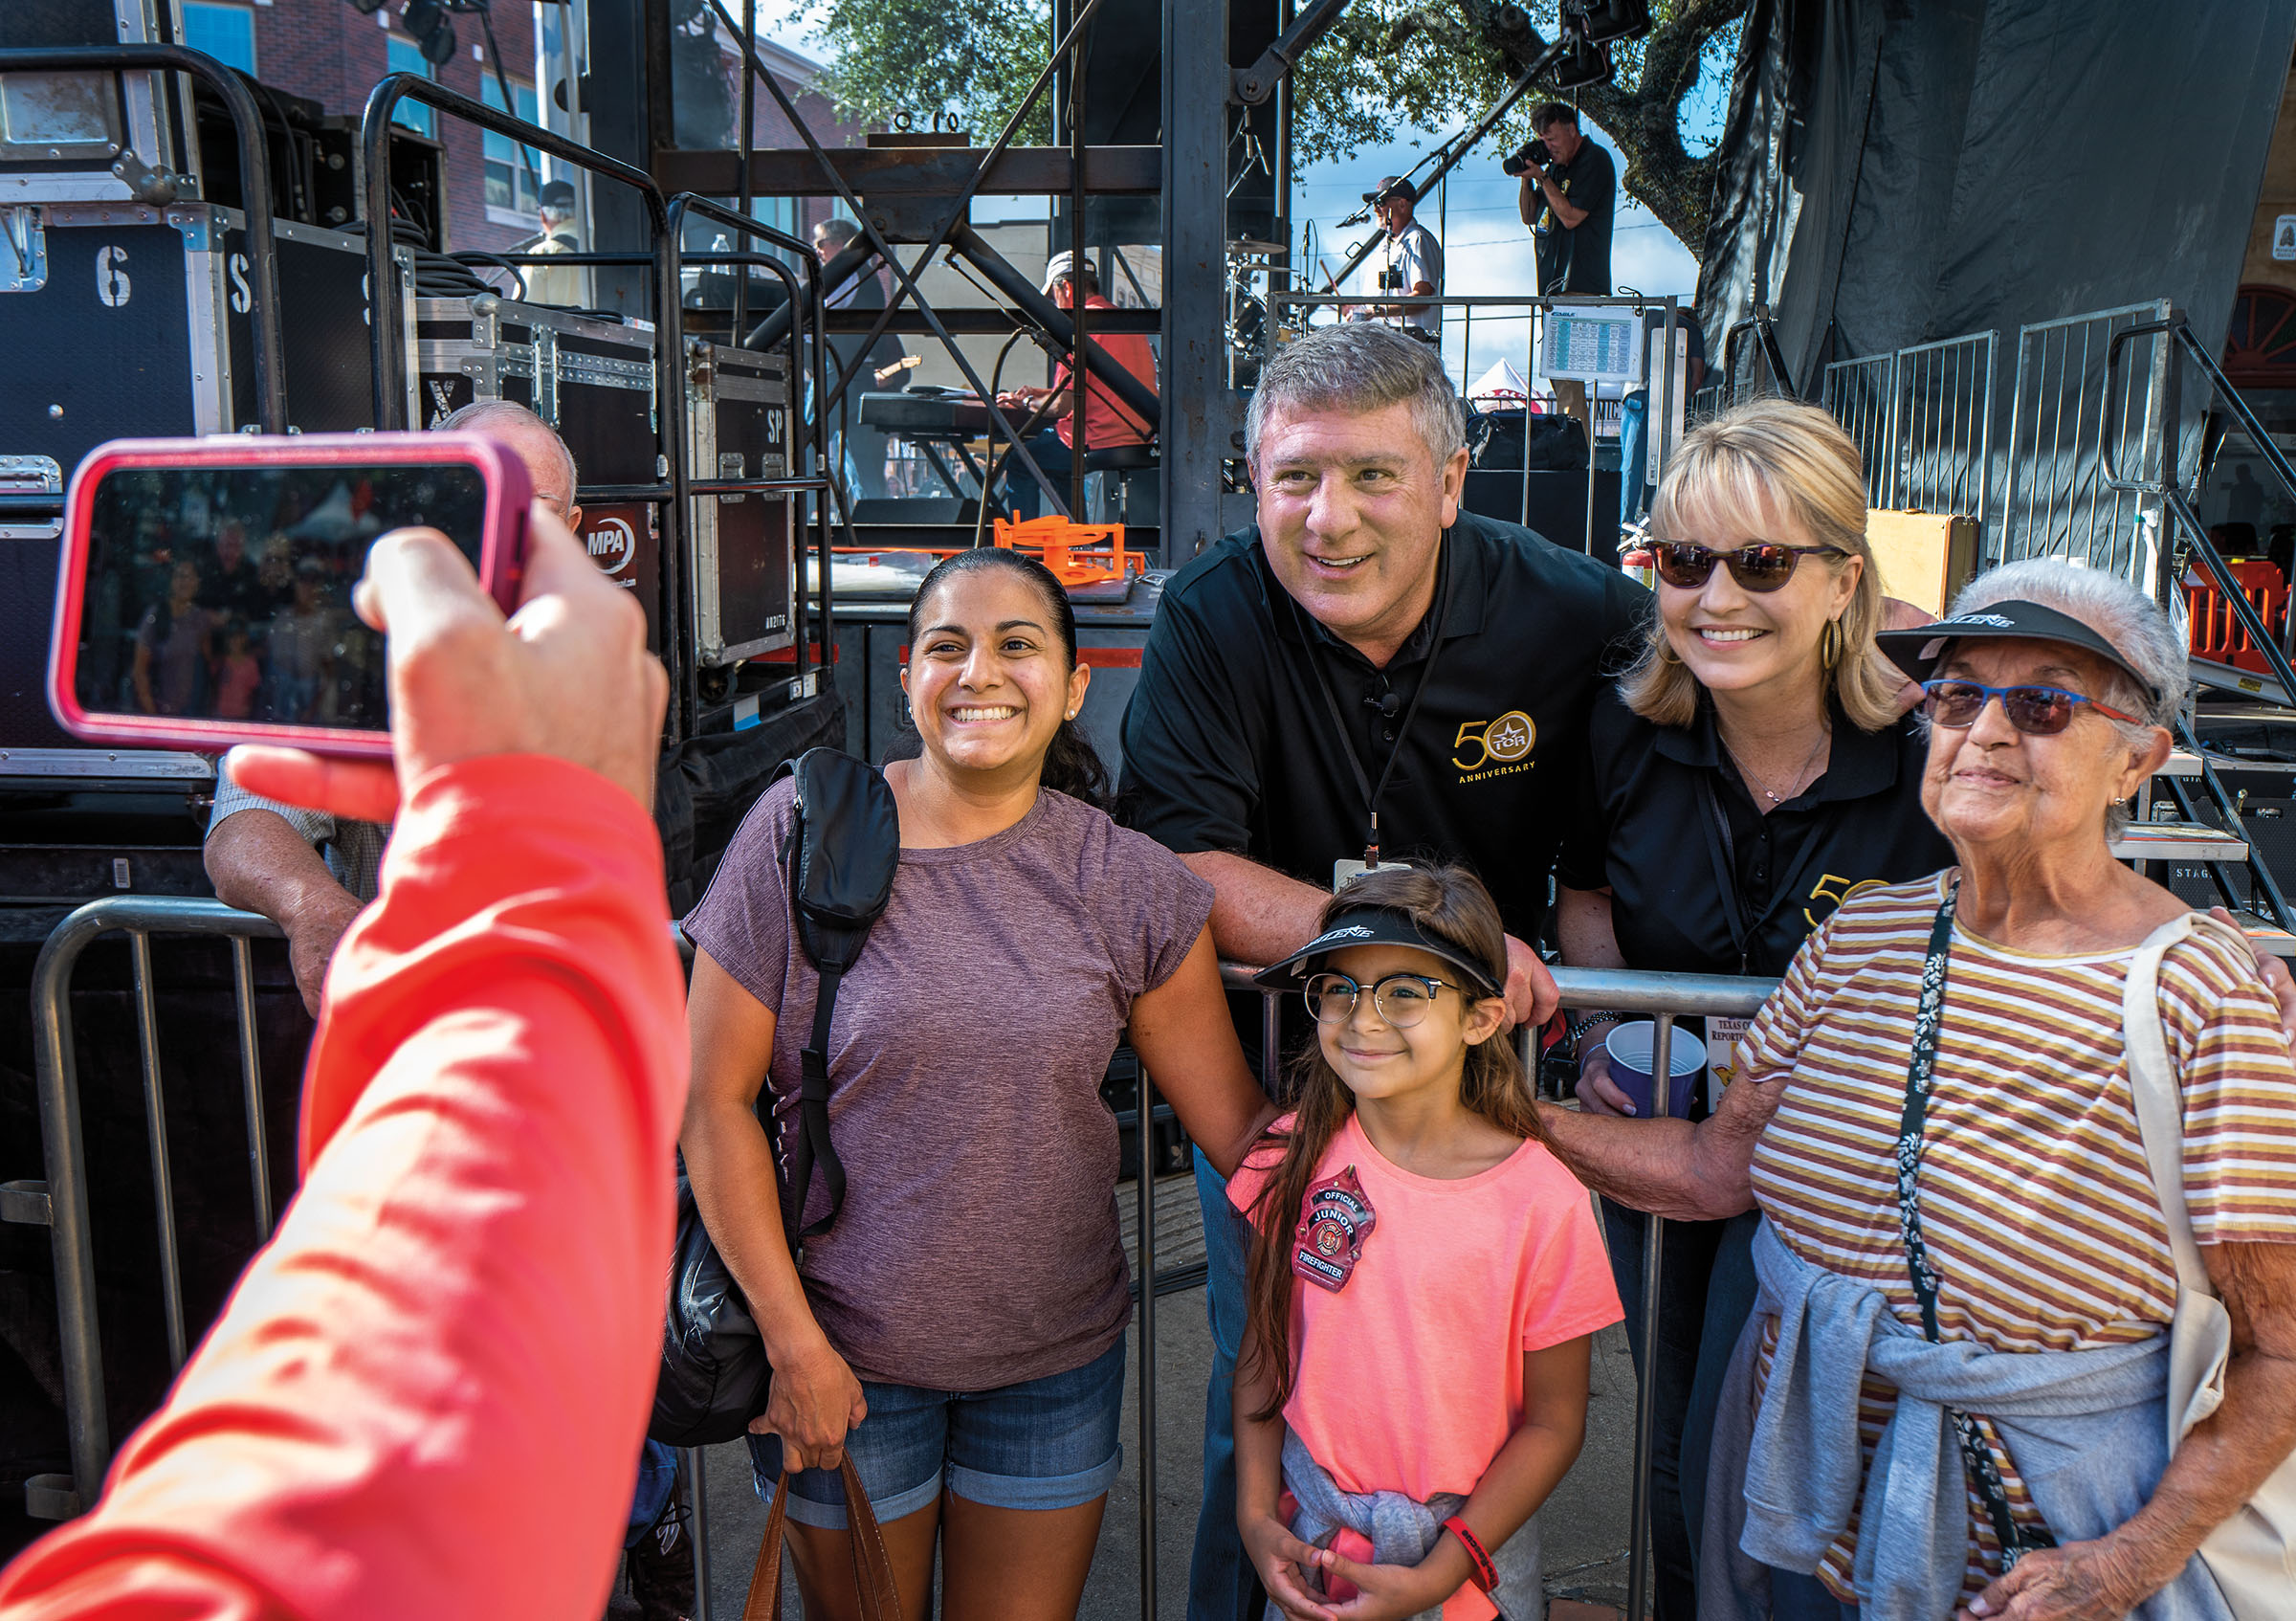 A group of people stand in front of a man and woman in black polo shirts and pose for a photograph. The setting appears to be a backstage area of a festival.